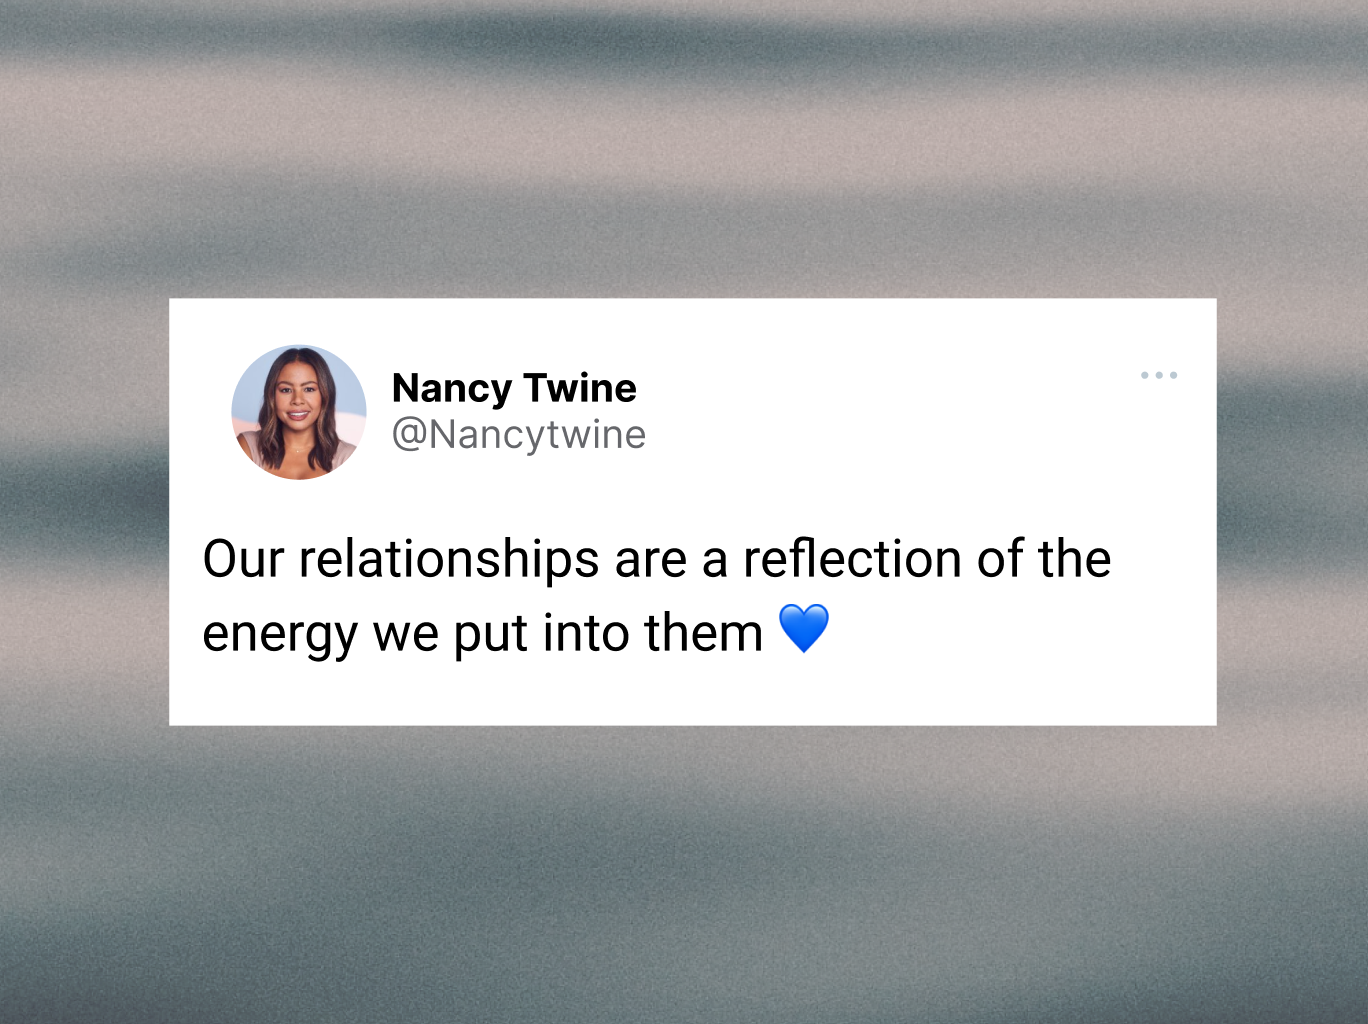 Nancy Twine tweets about the importance of personal relationships